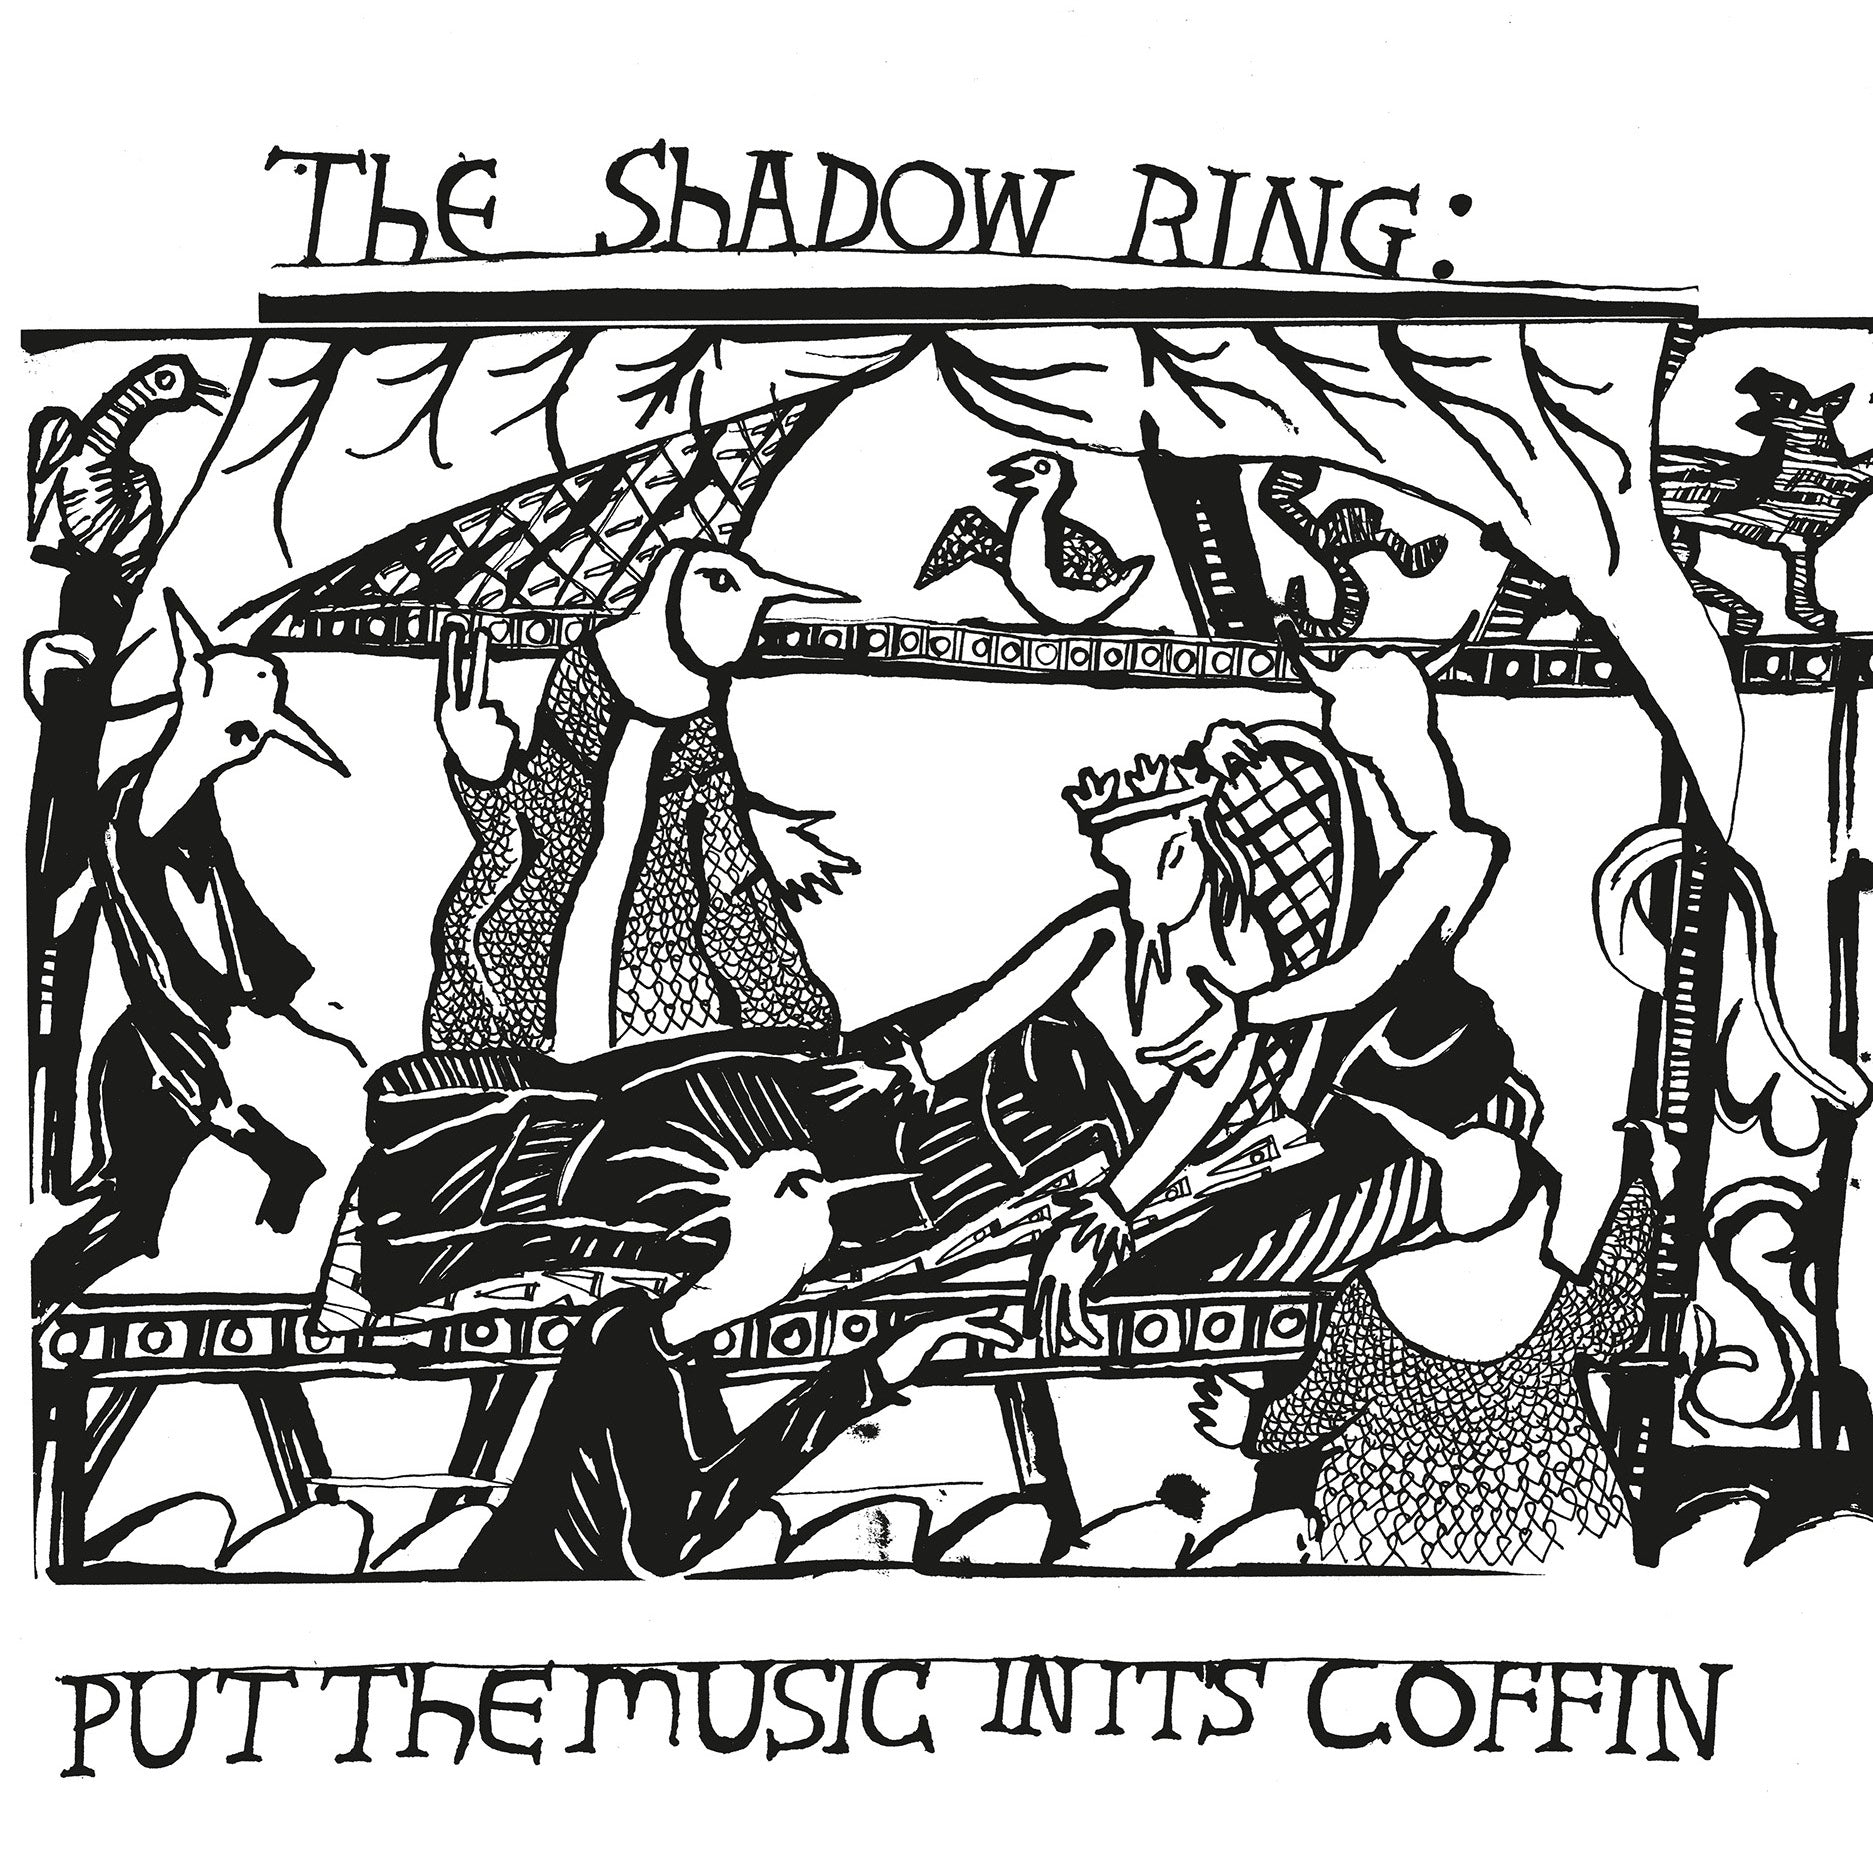 The Shadow Ring's Put the Music In Its Coffin